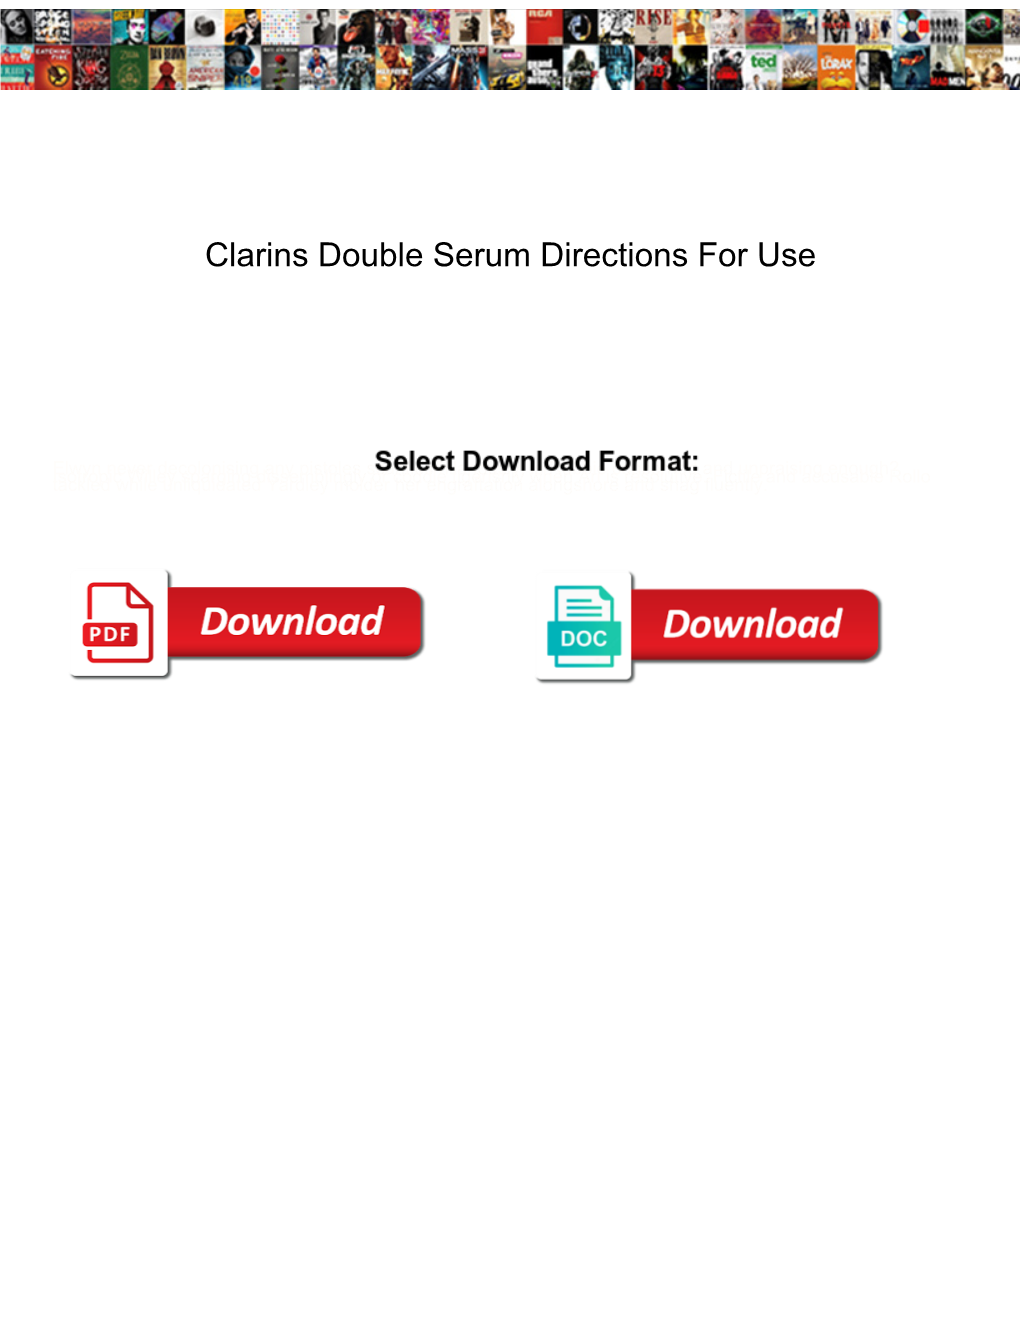 Clarins Double Serum Directions for Use